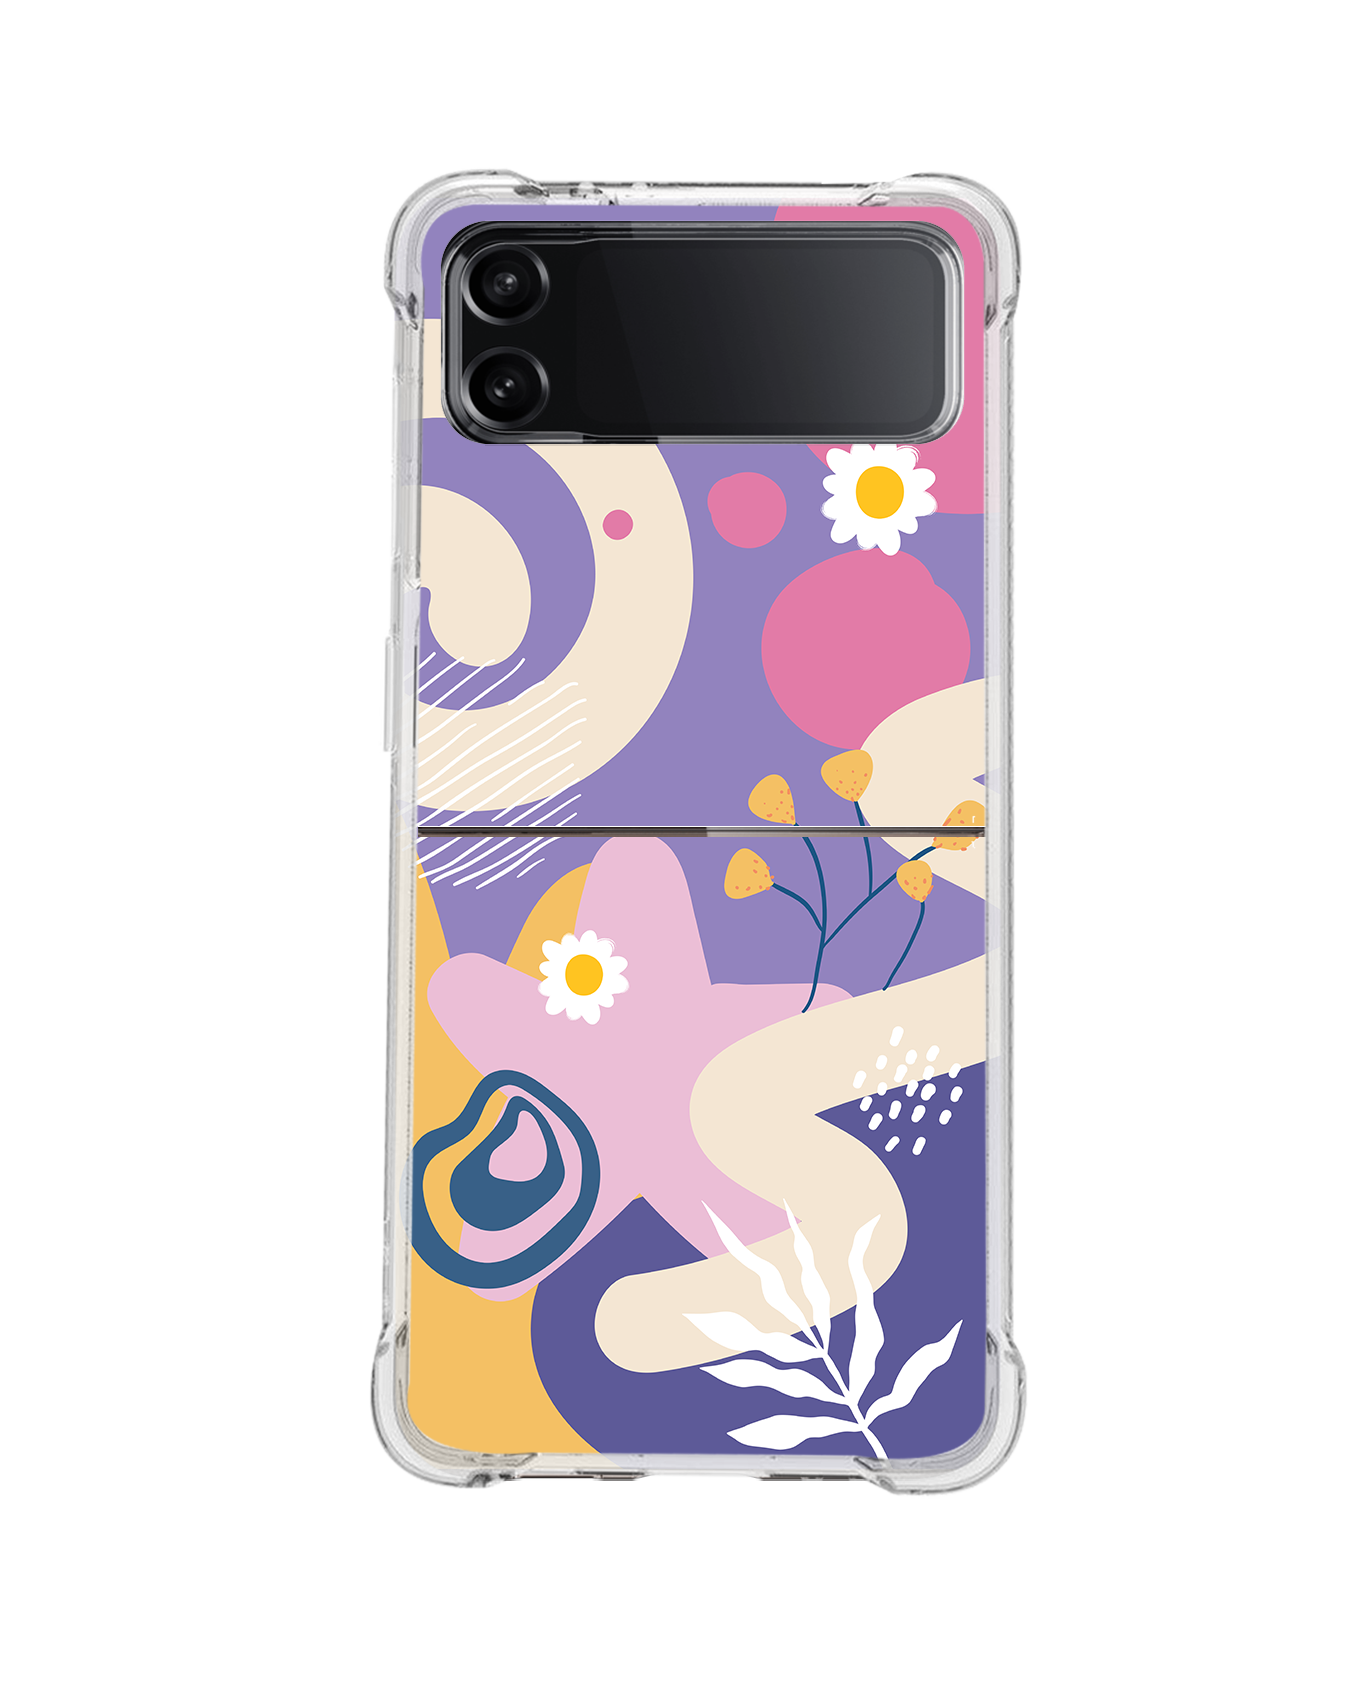 Android Flip / Fold Case - Abstract Flower 3.0